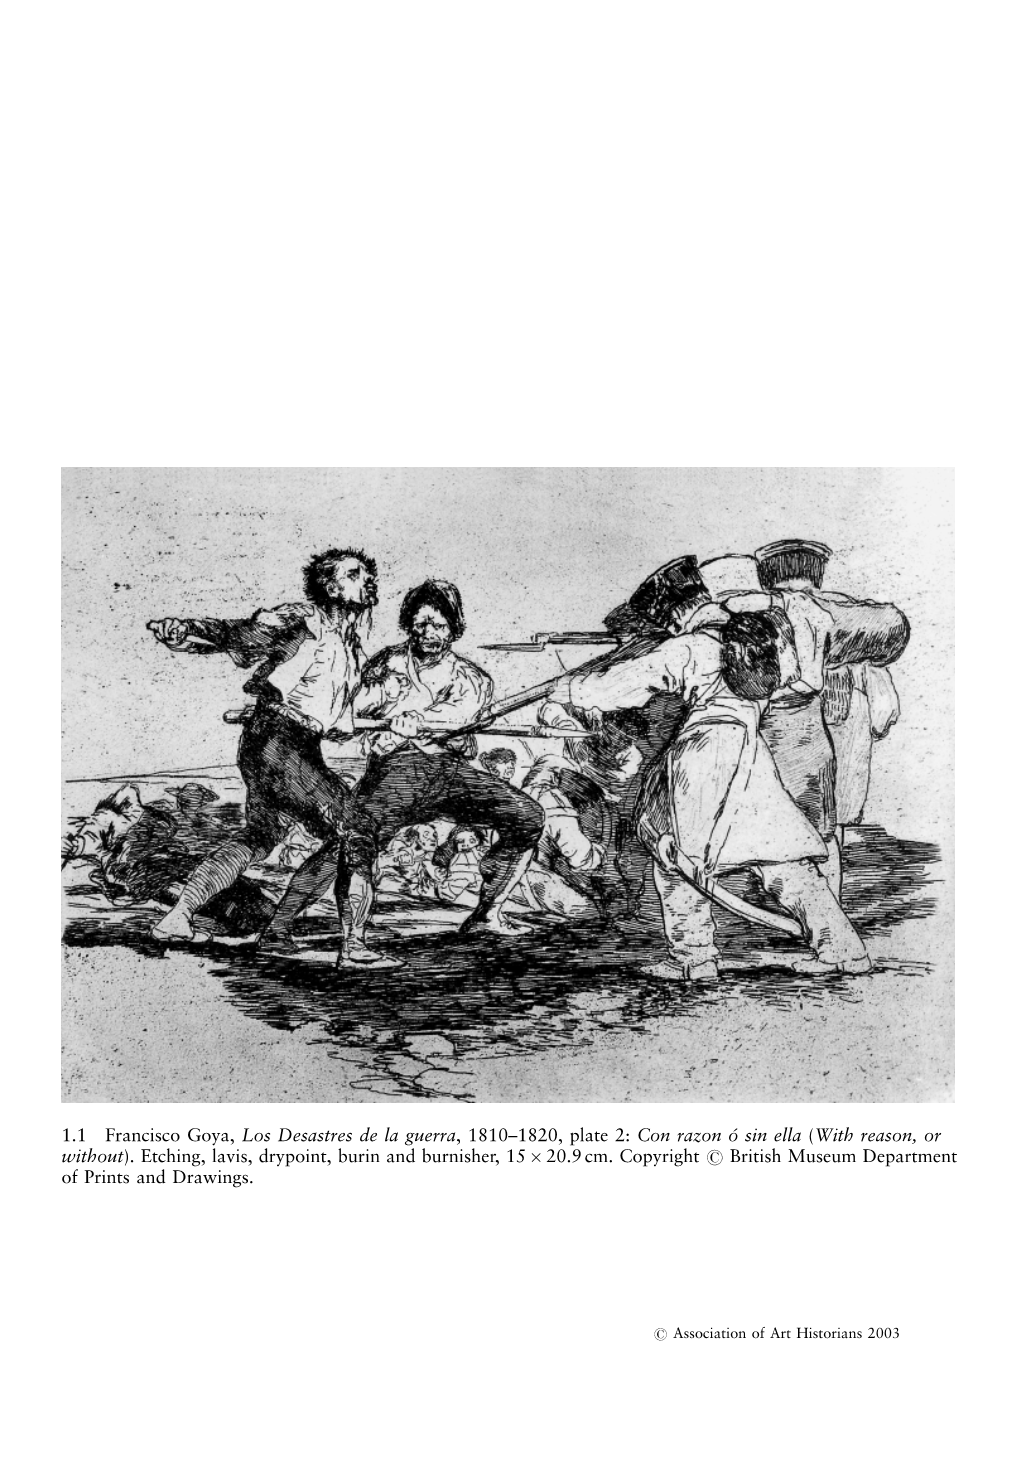 Goya, the Chapman Brothers and the Disasters of War